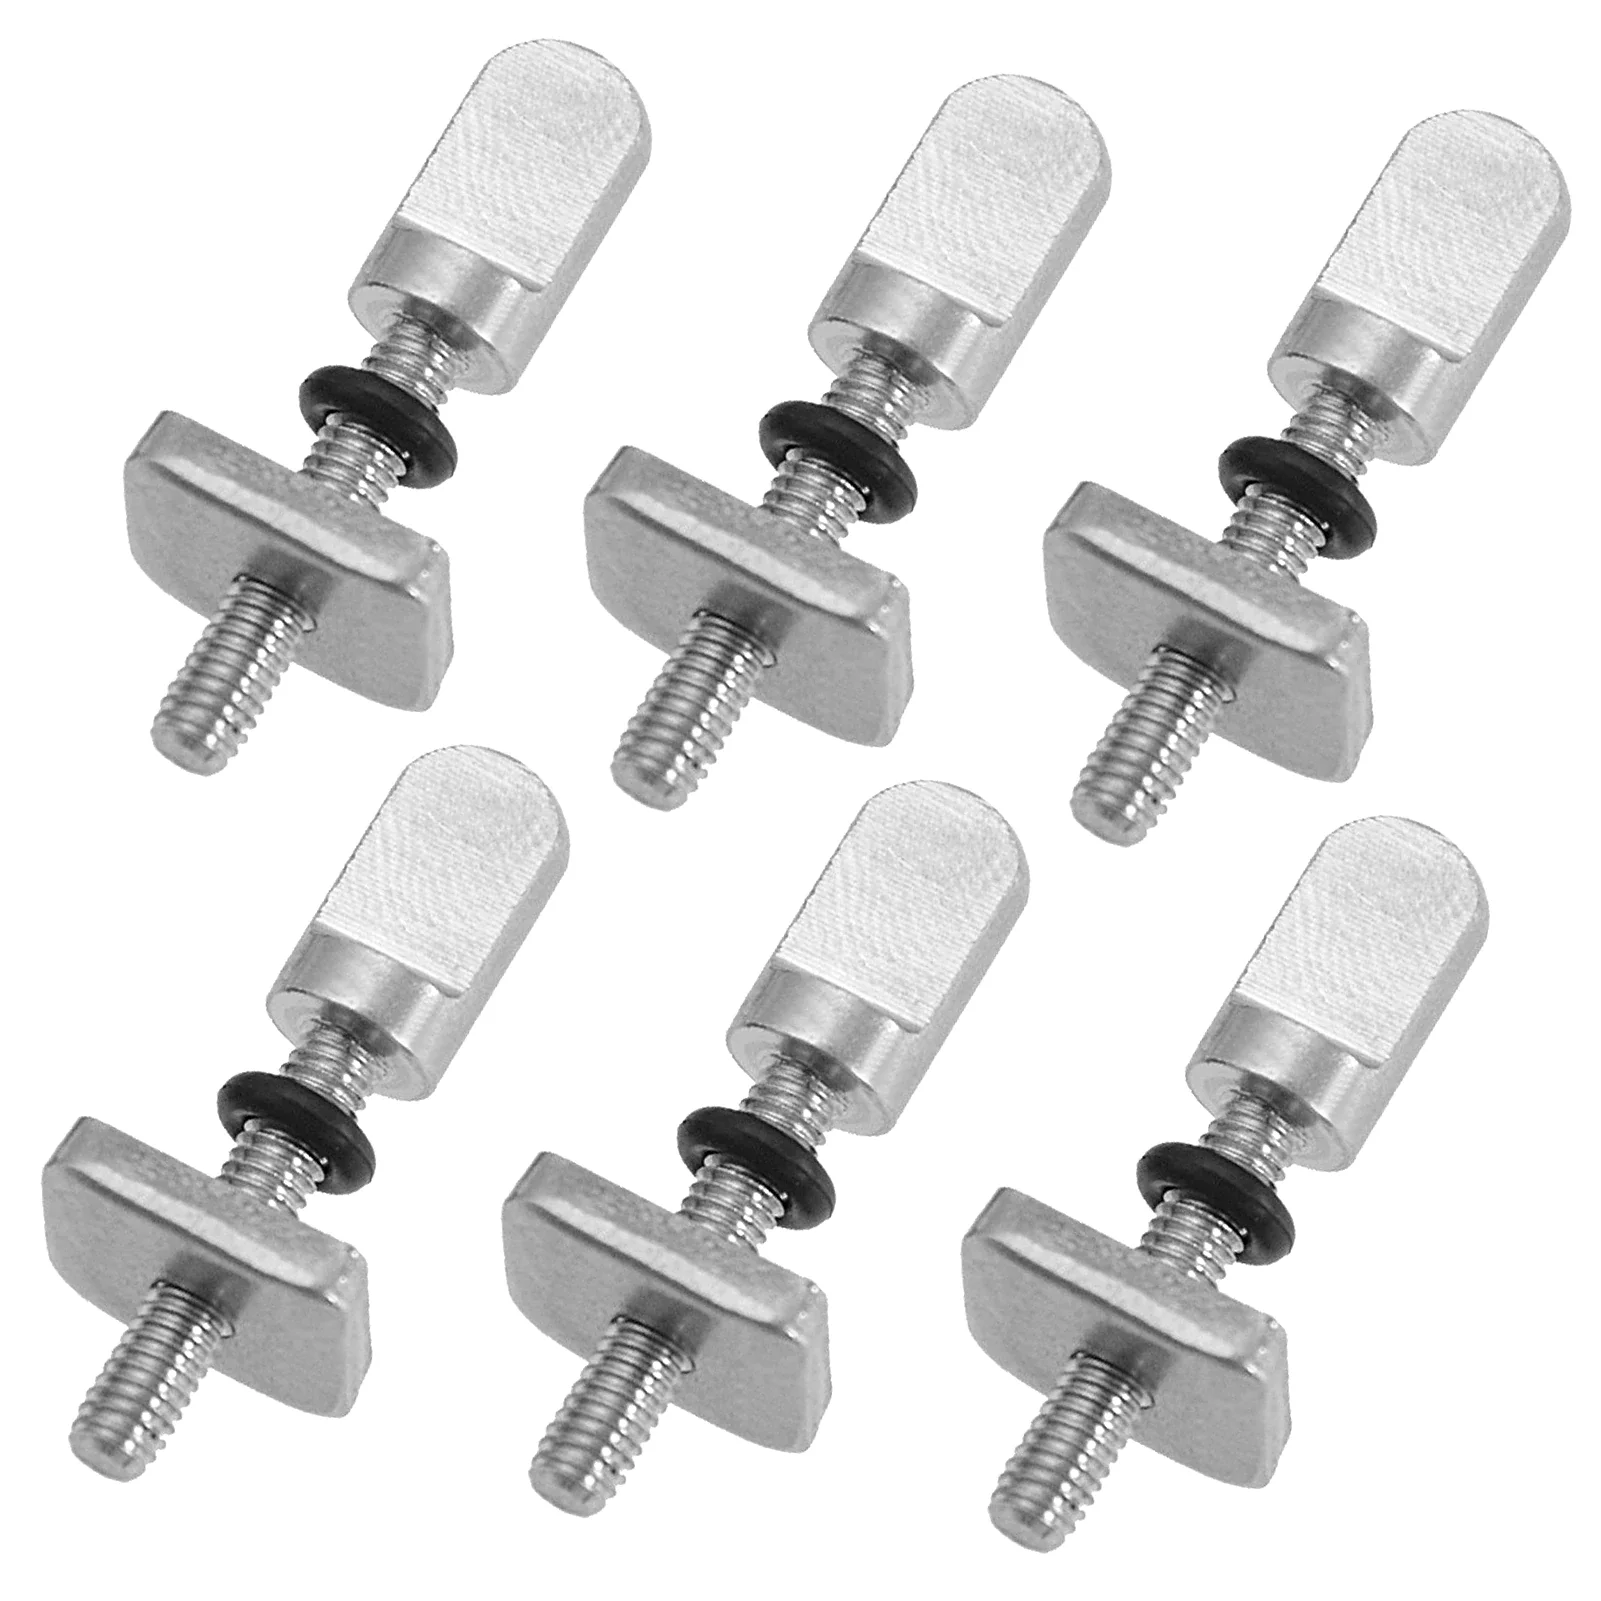 3pcs/6pcs Stainless Steel Surfboard Fin Screw M4 Surf Fin Bolts Longboard Sliding Fin Screws Single Fin Nails Replacing Screws 10pcs professional advertisement nails standoff bolt stainless steel mirror glass wall support fixing screws decor hardware